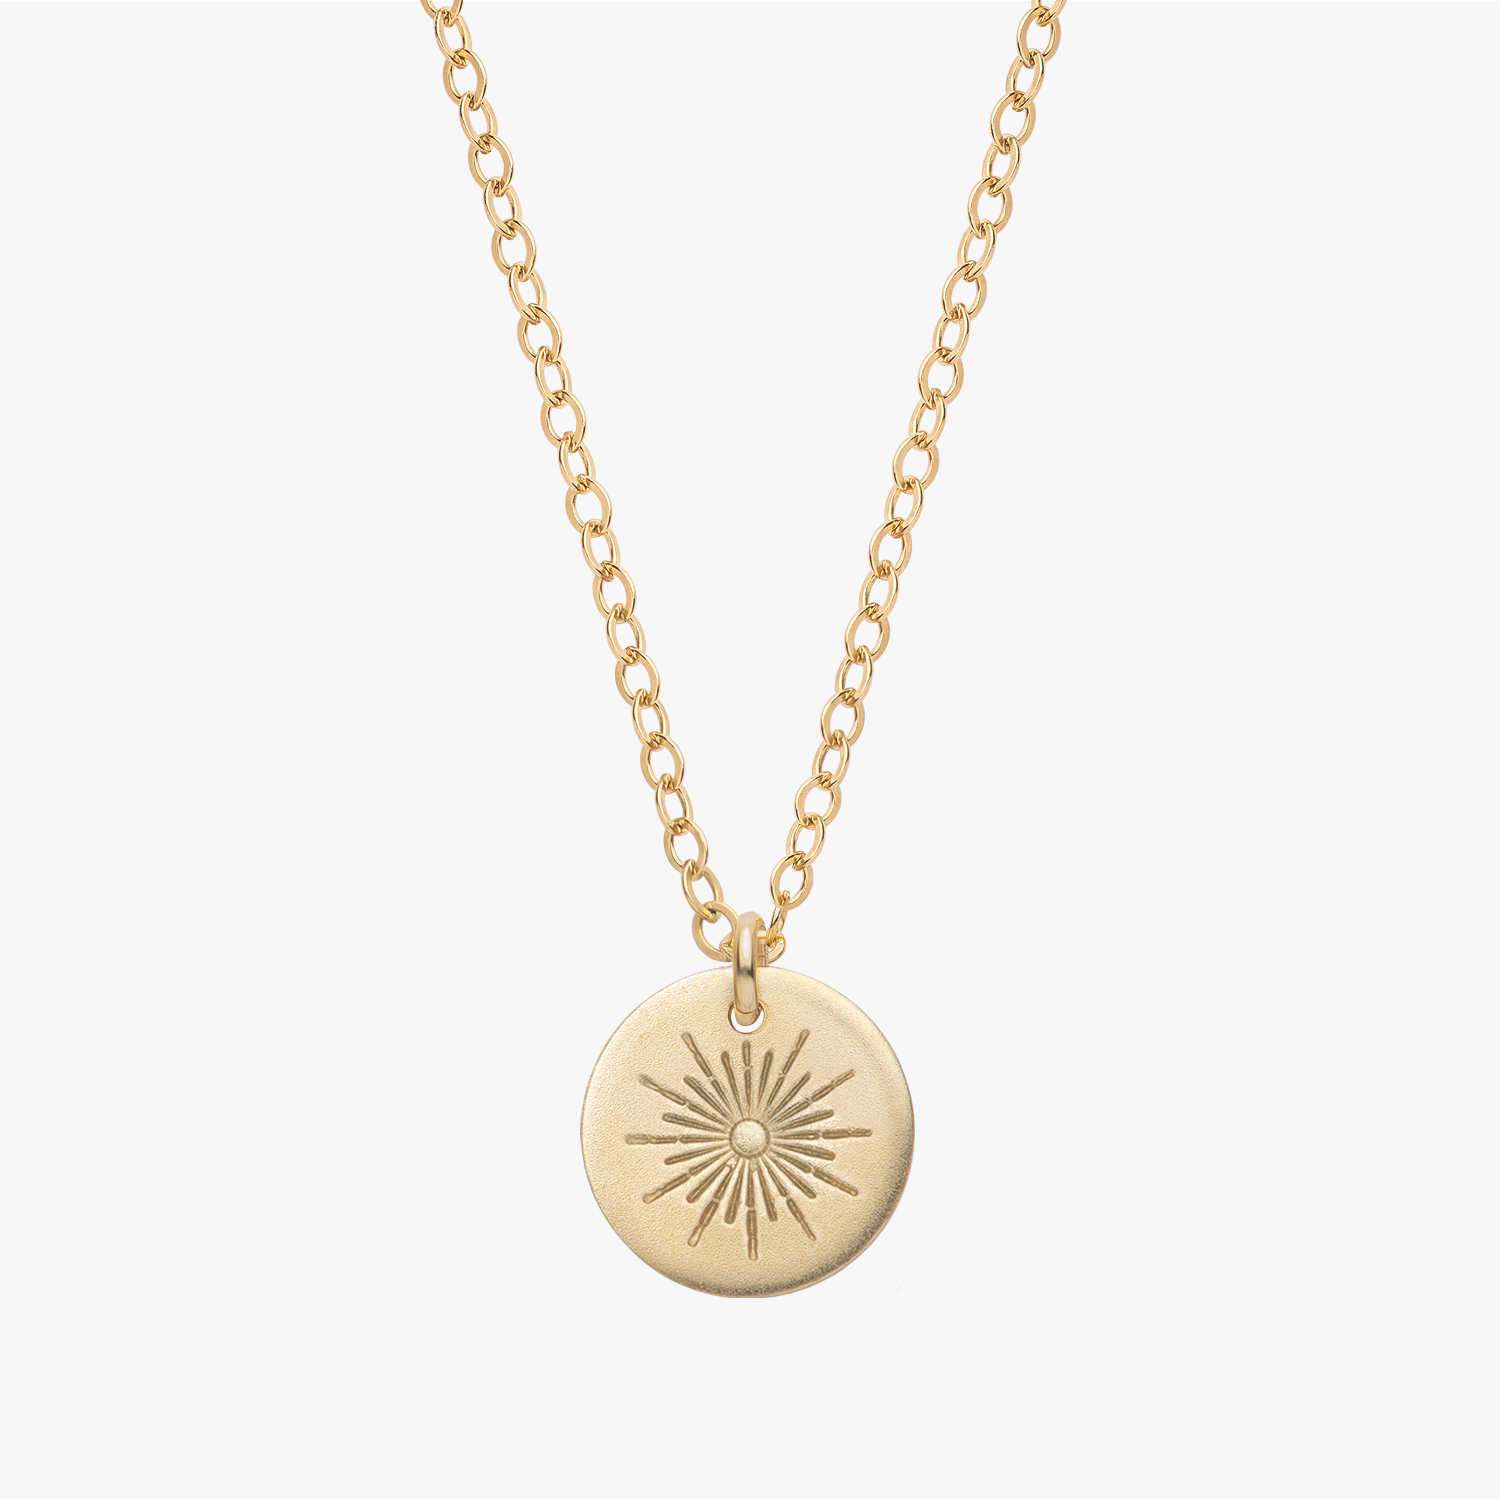 Personalized Celestial Gold Necklace